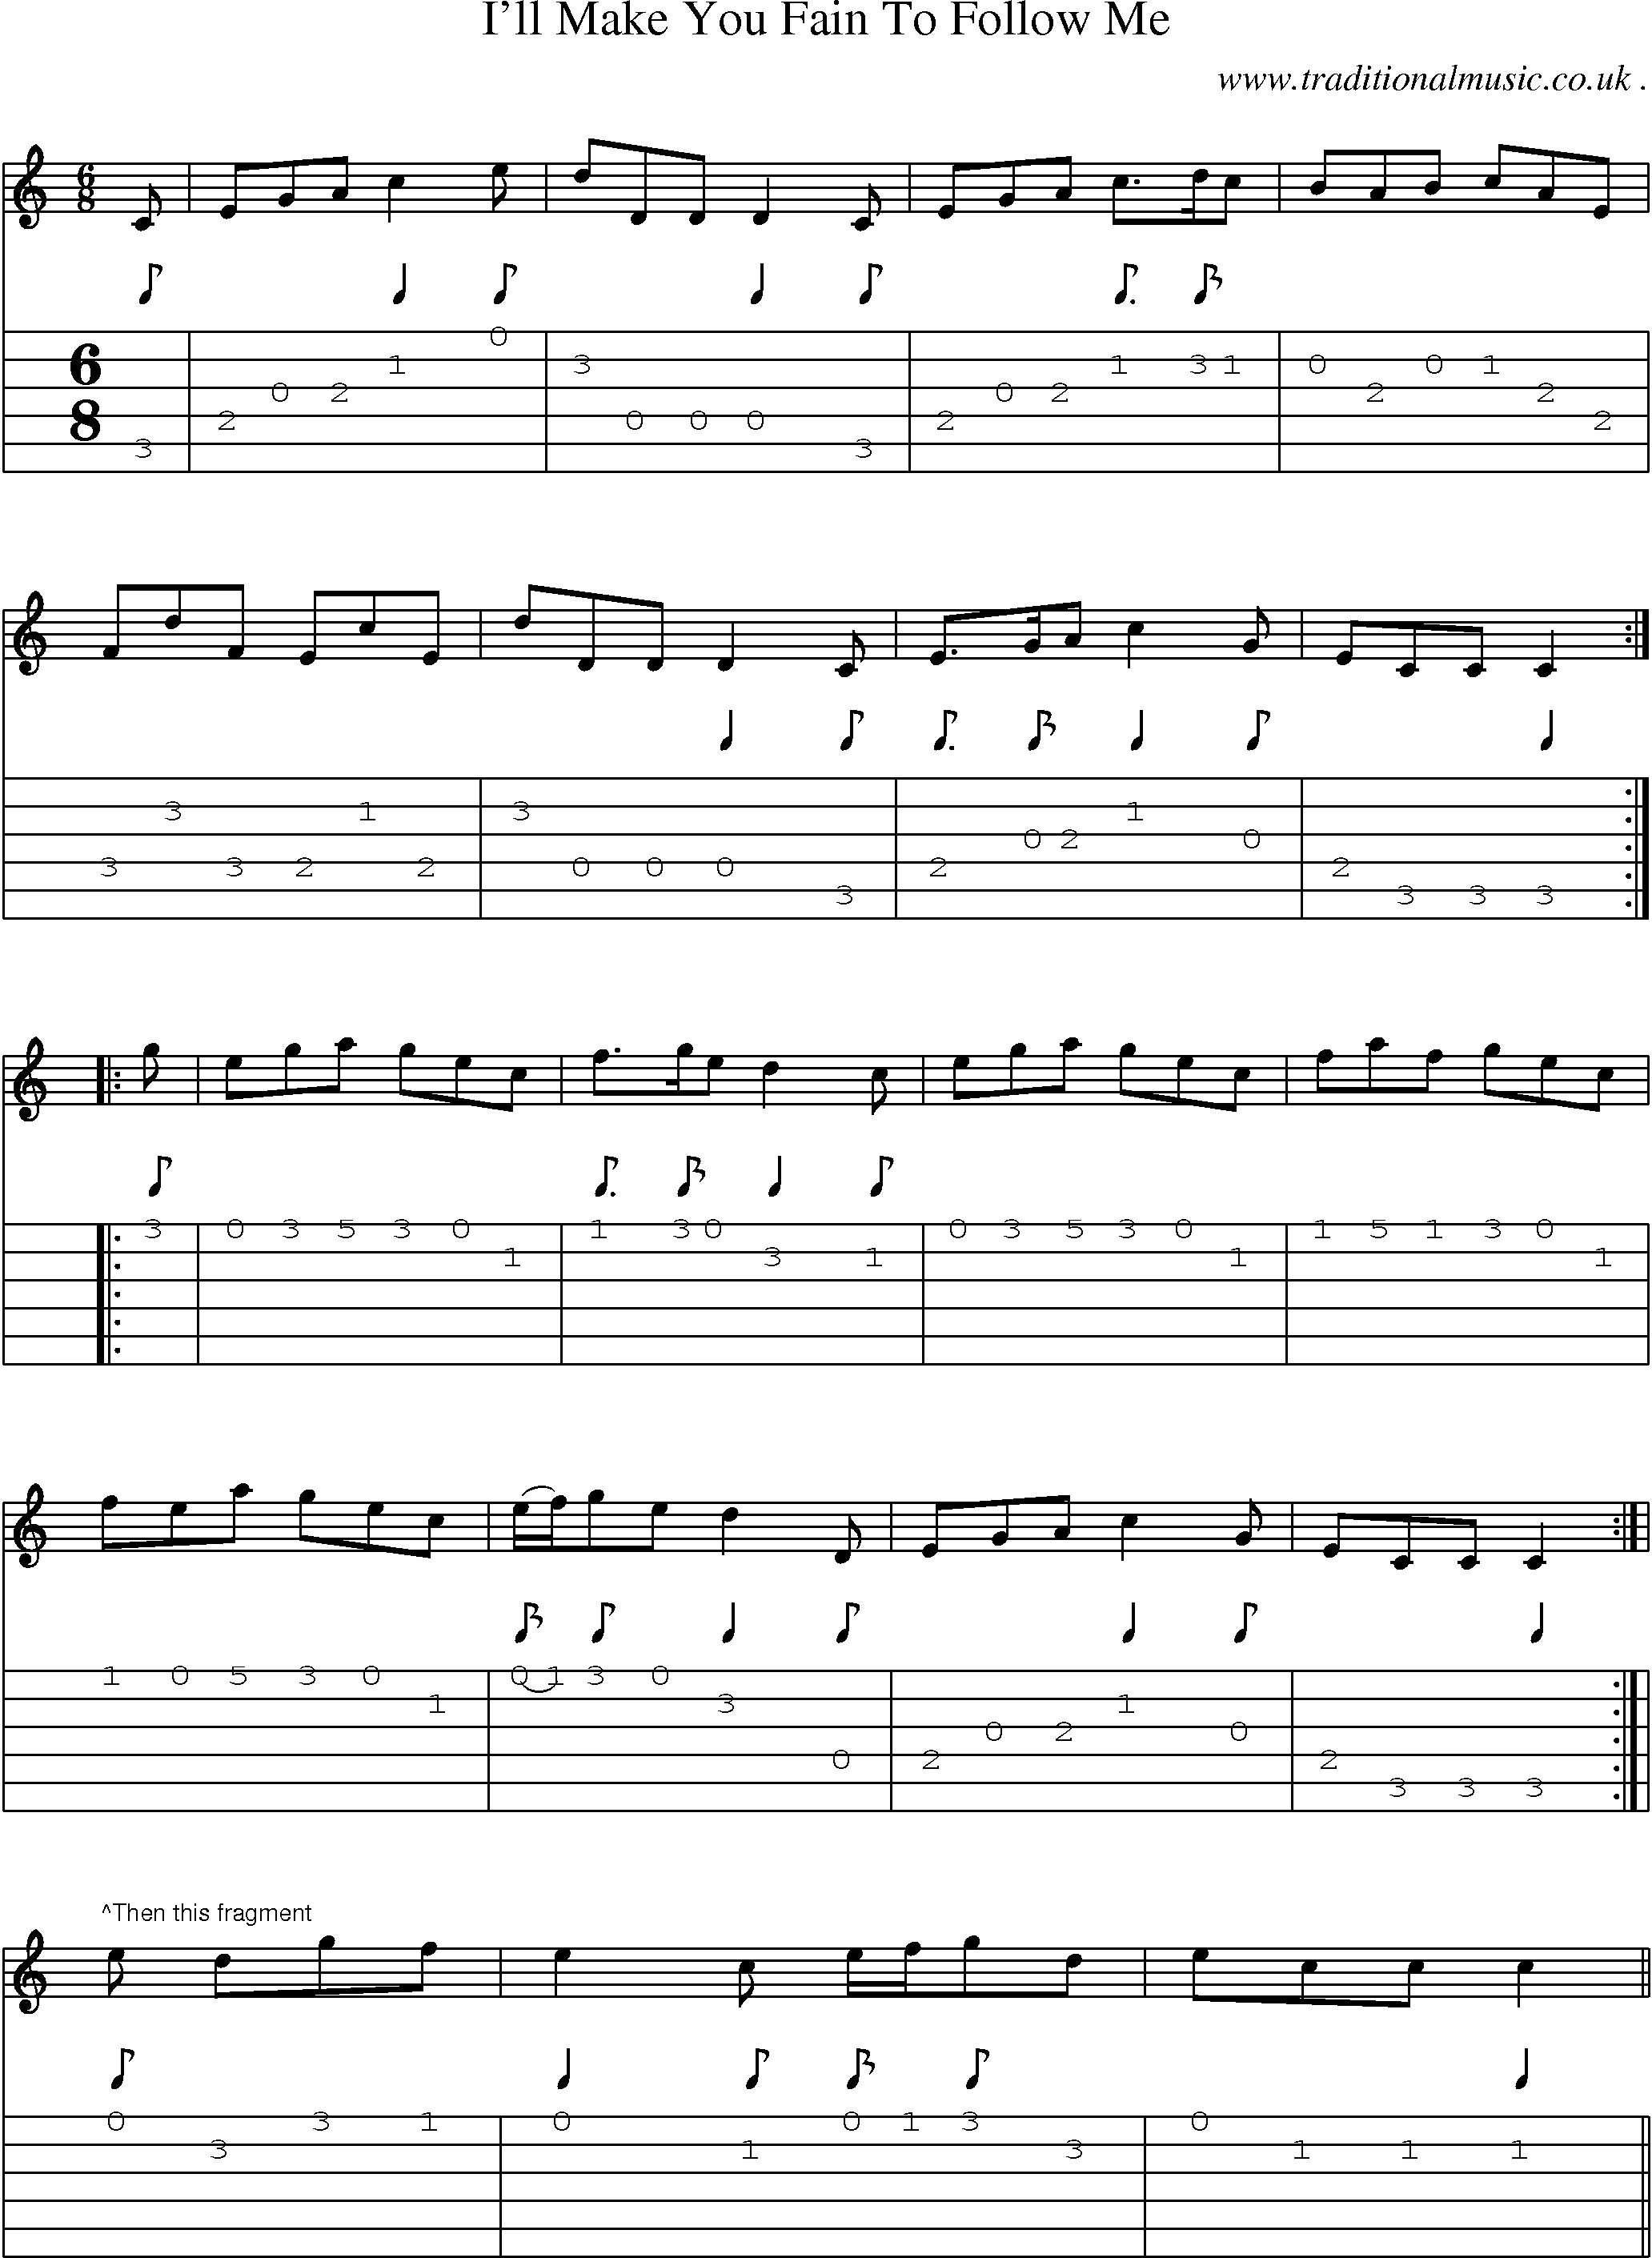 Sheet-Music and Guitar Tabs for Ill Make You Fain To Follow Me